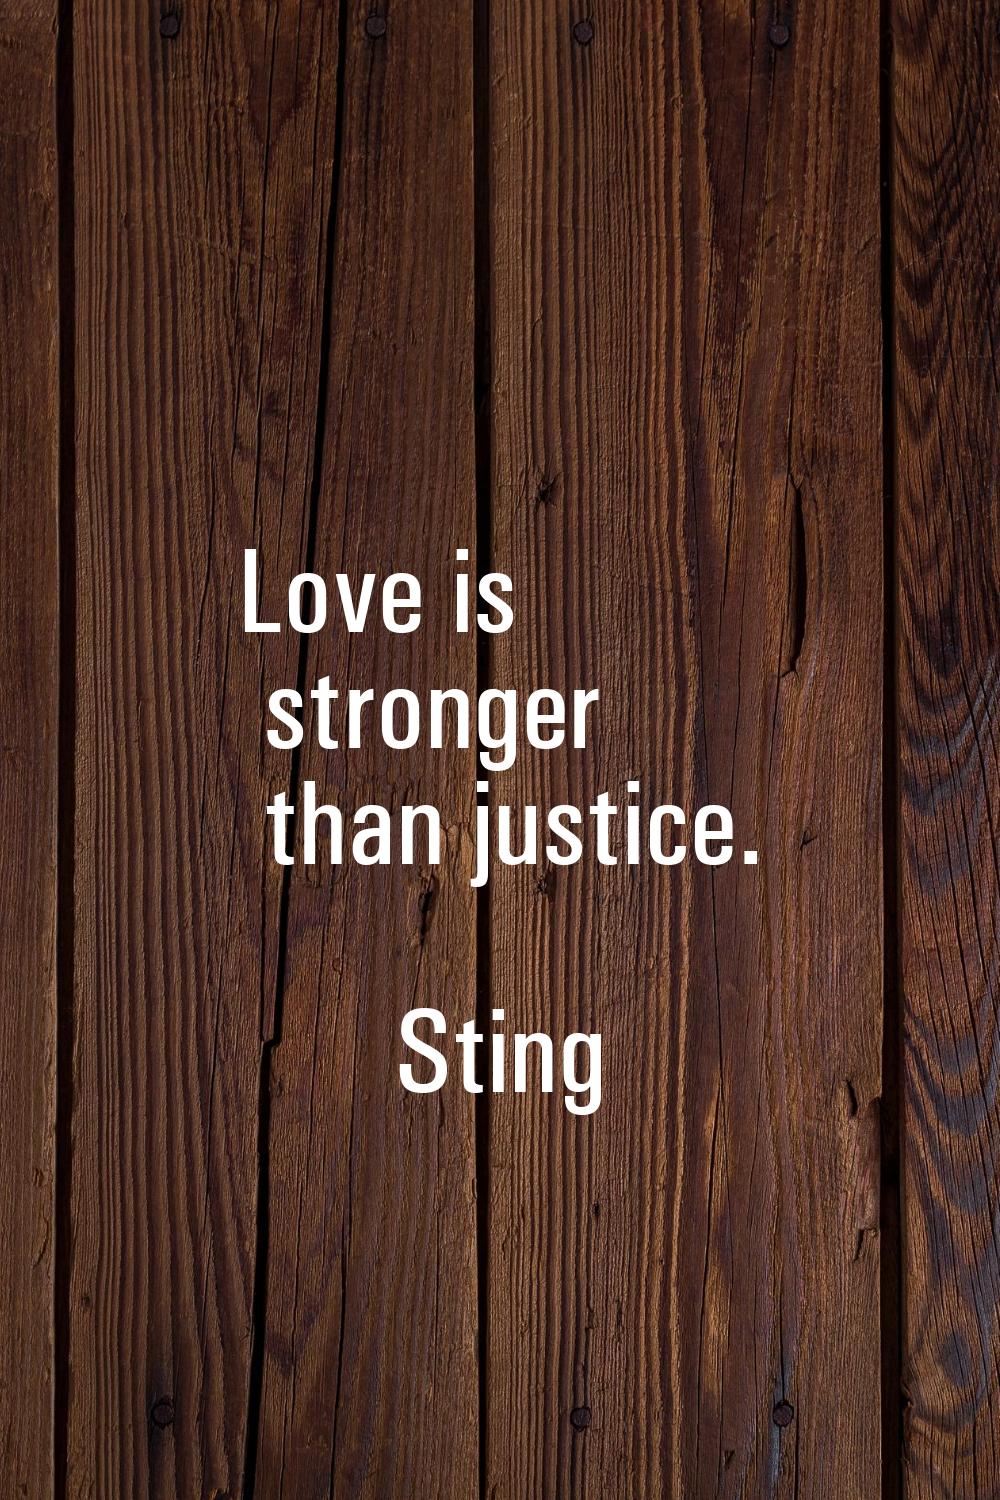 Love is stronger than justice.